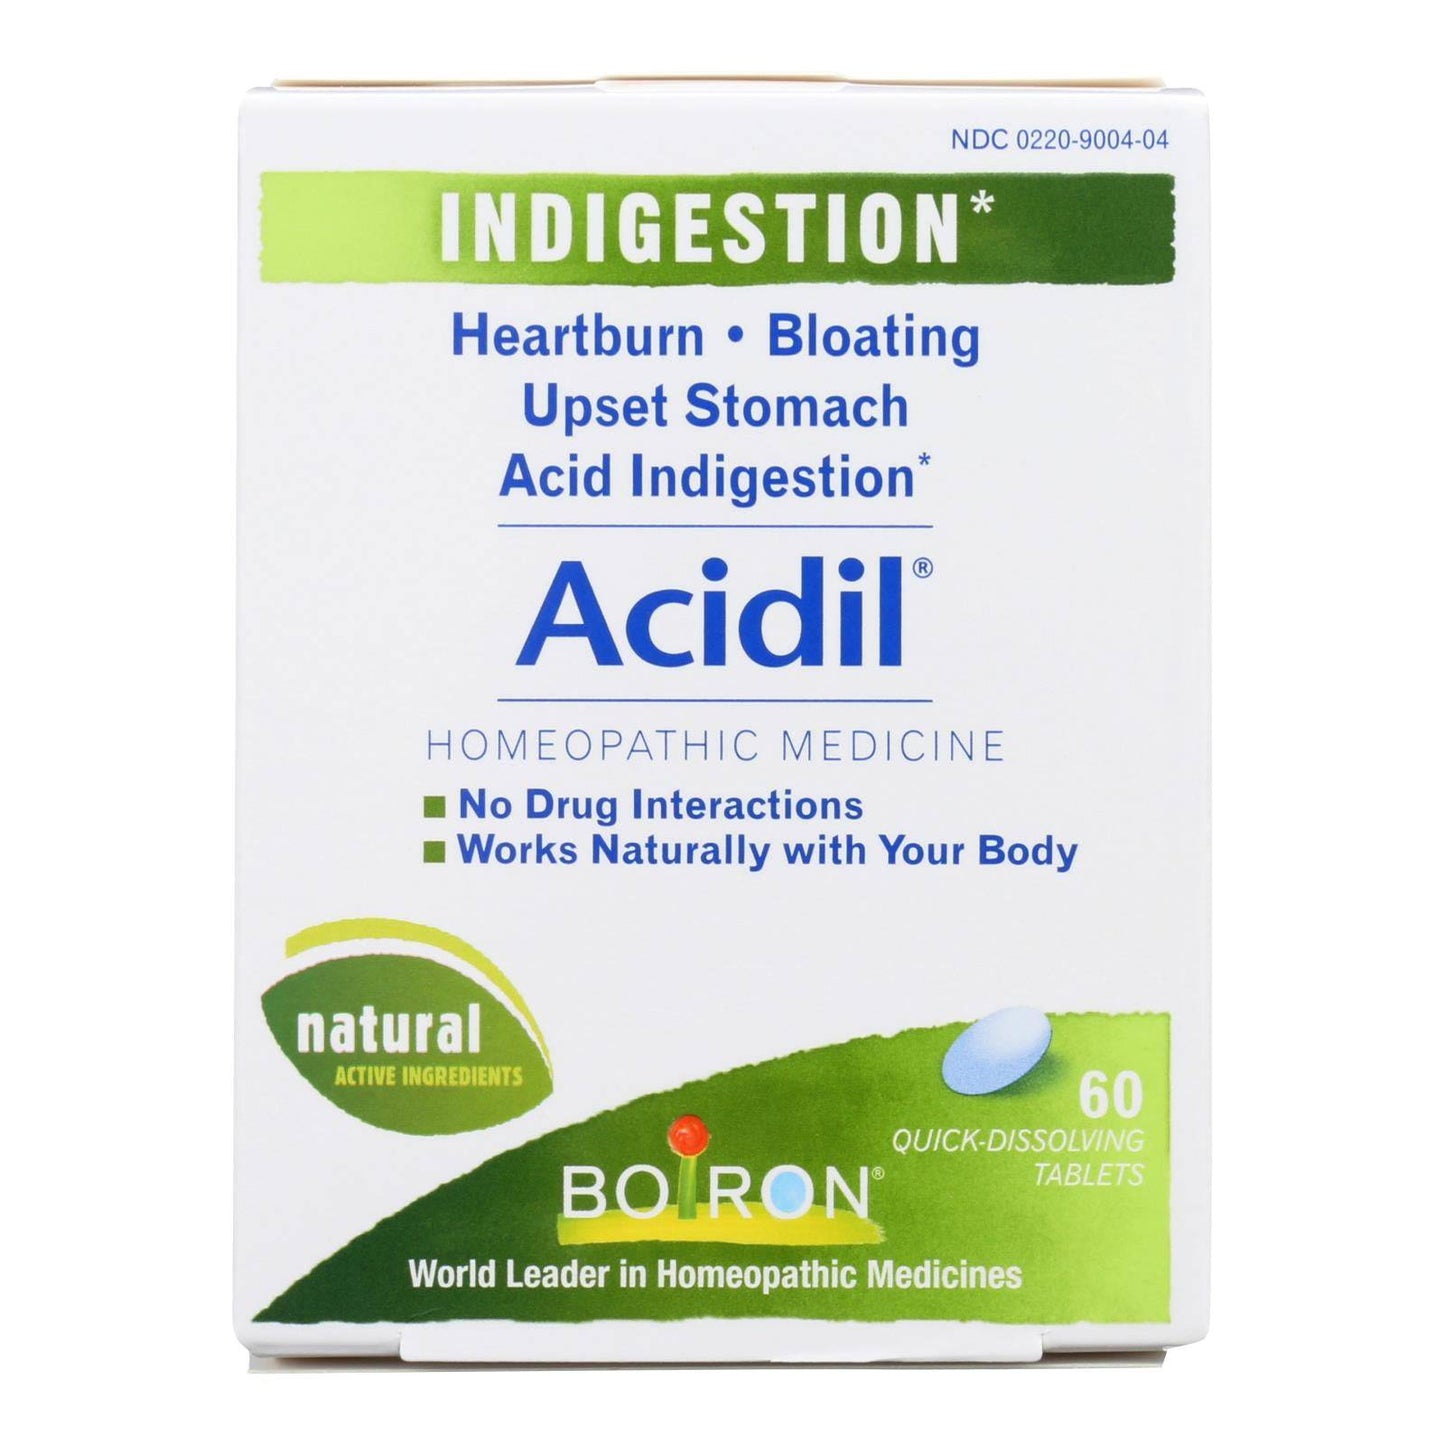 Buy Boiron - Acidil - 60 Tablets  at OnlyNaturals.us